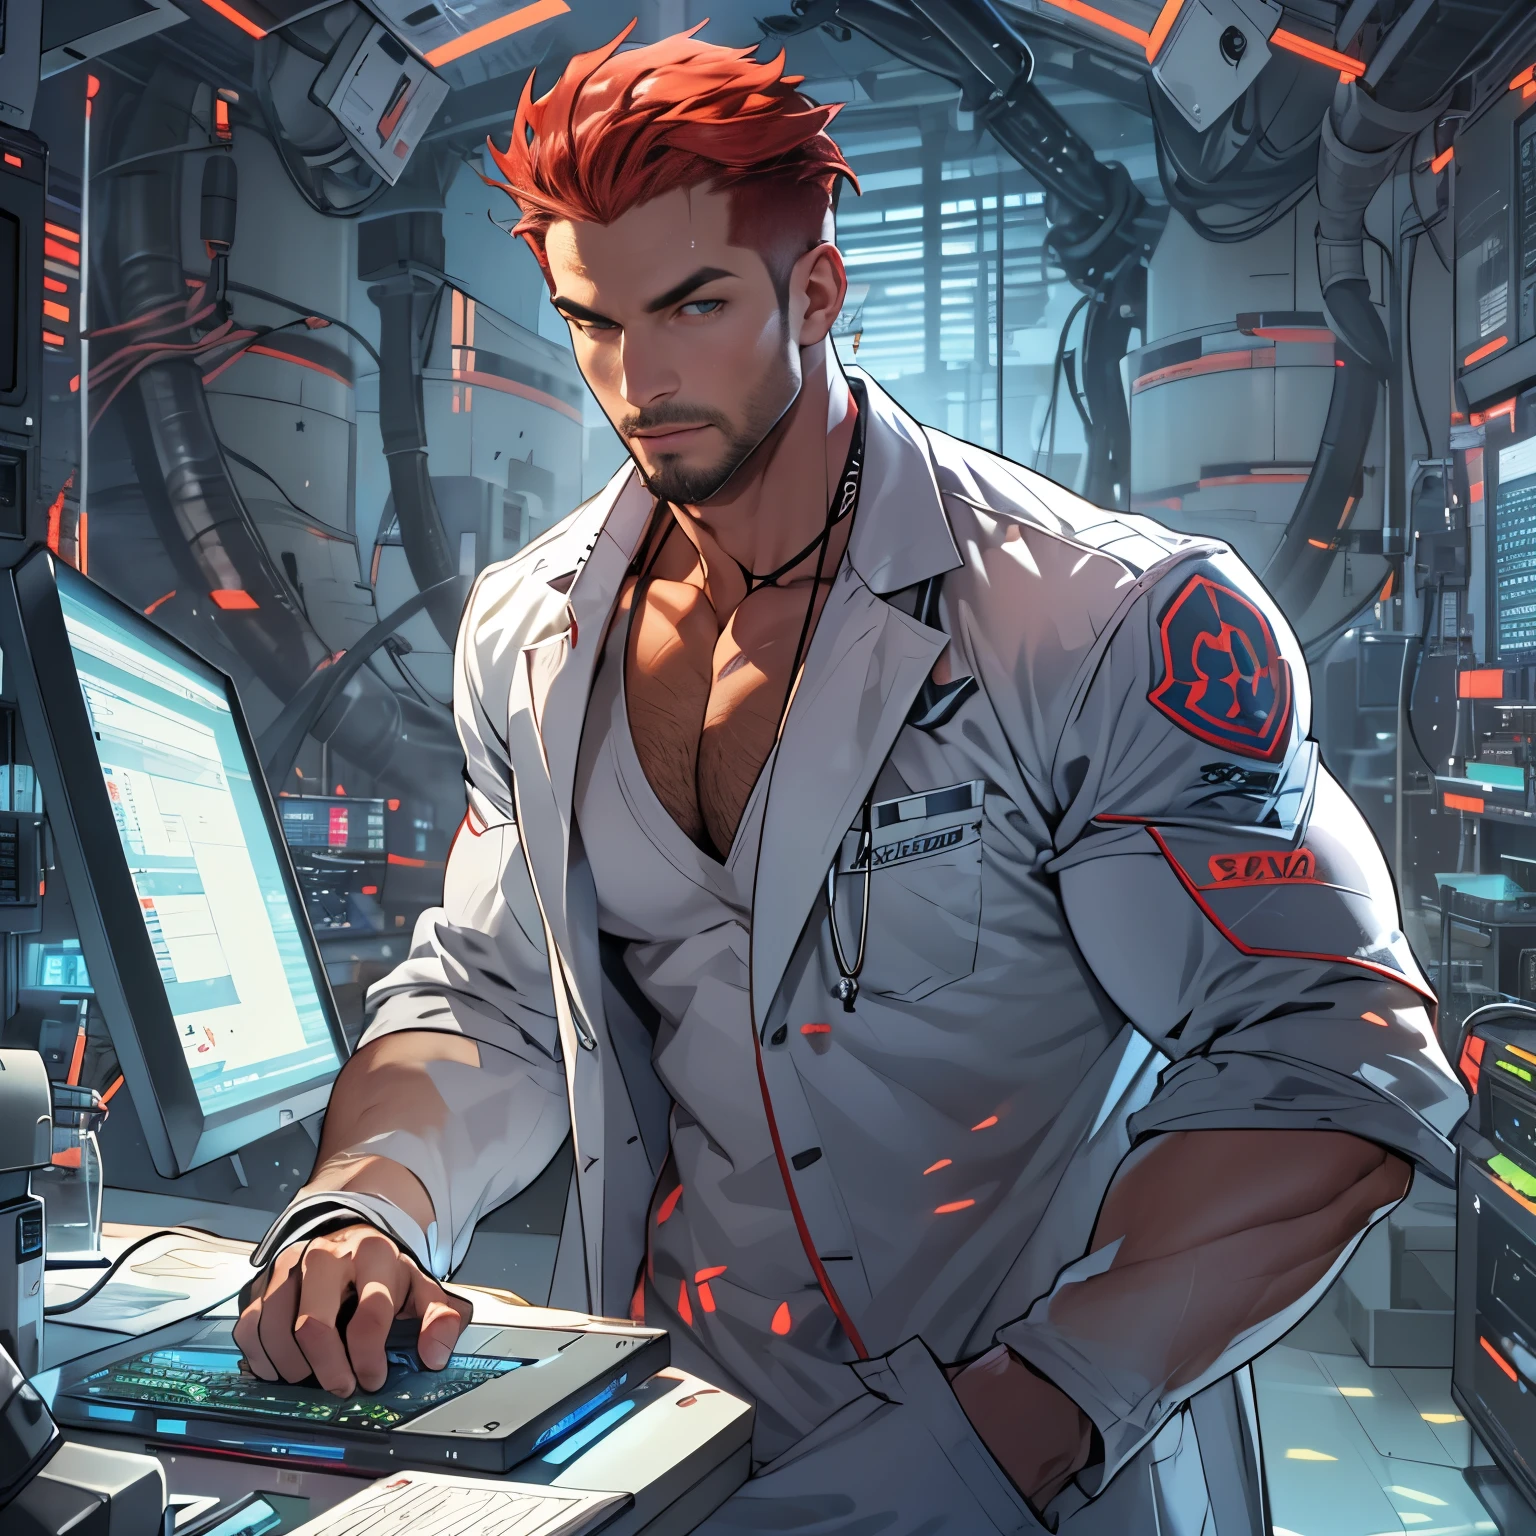 handsome scientist in a revealing lab coat, short hair, stubble, red hair, muscular, working on supercomputers, futuristic lab setting, focused, nice skin, big bulge, big muscles